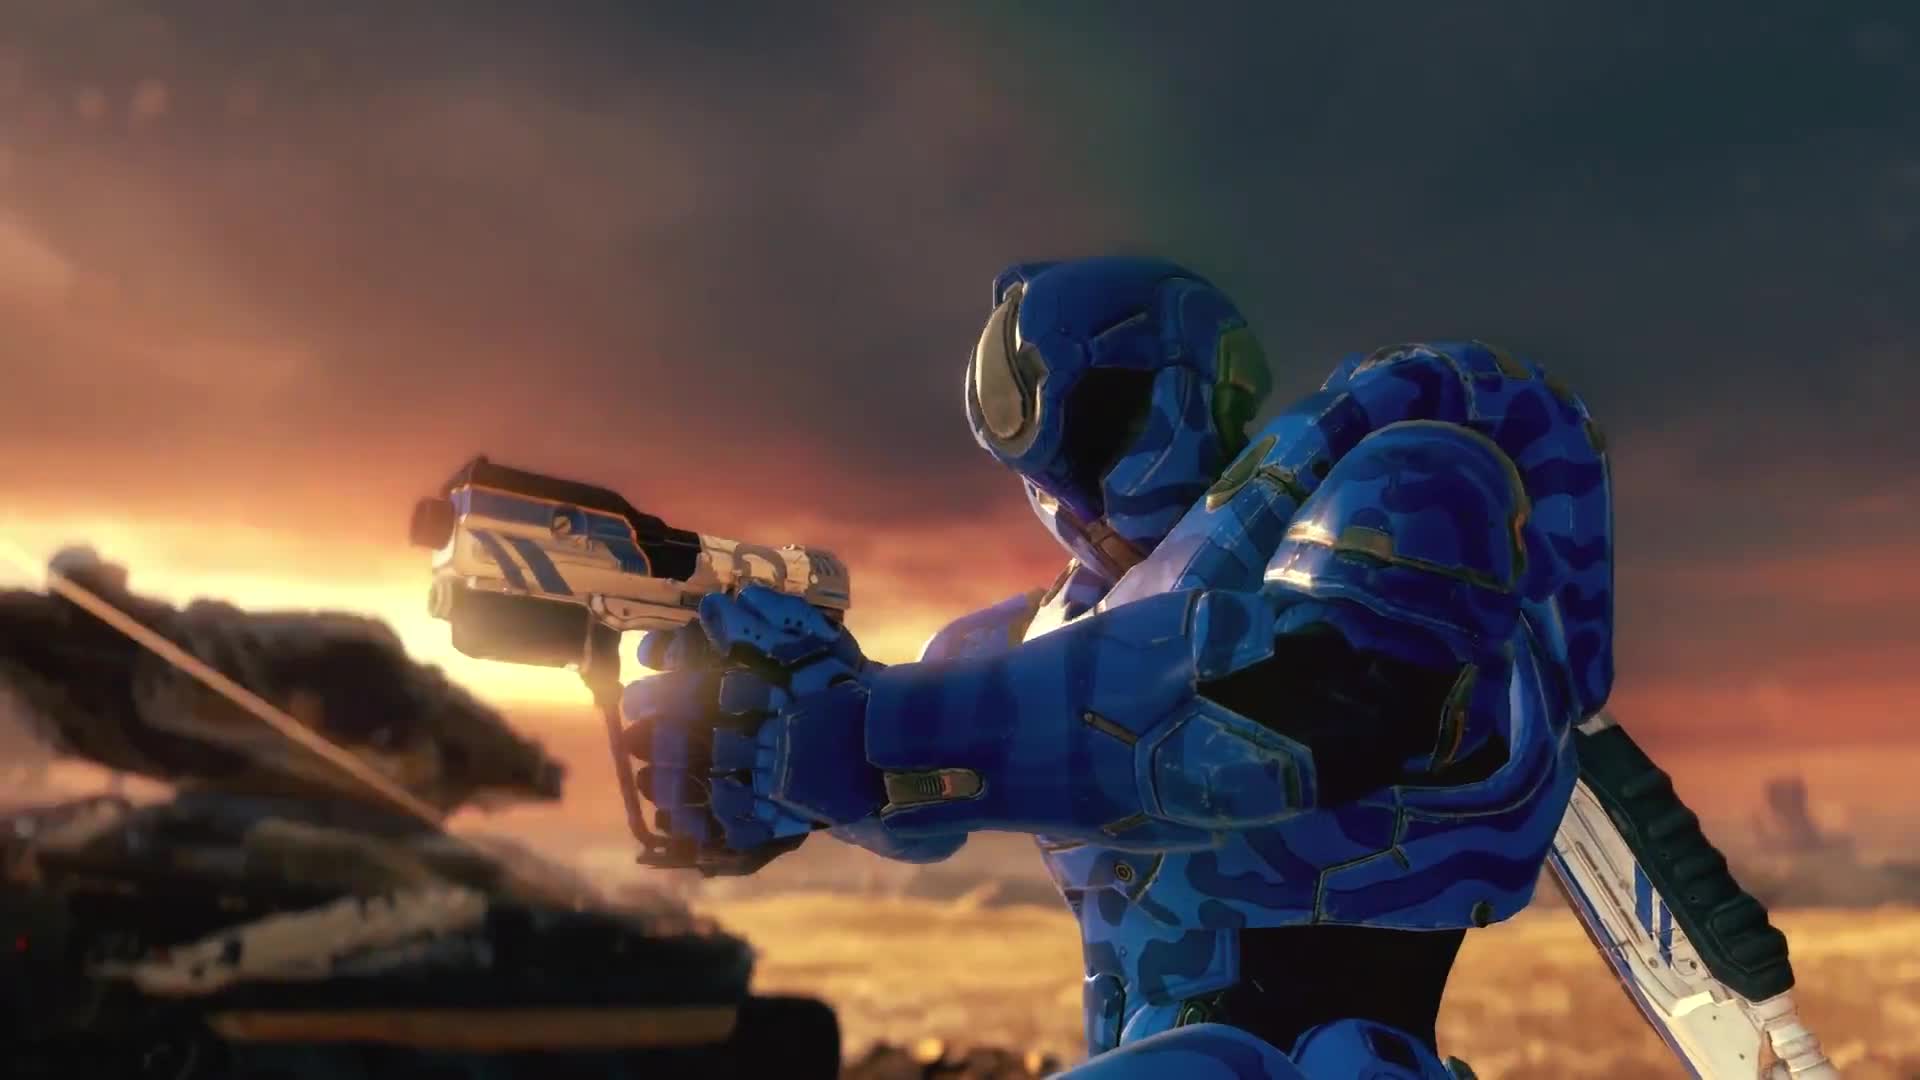 Halo 5: Guardians - Ghosts of Meridian launch trailer